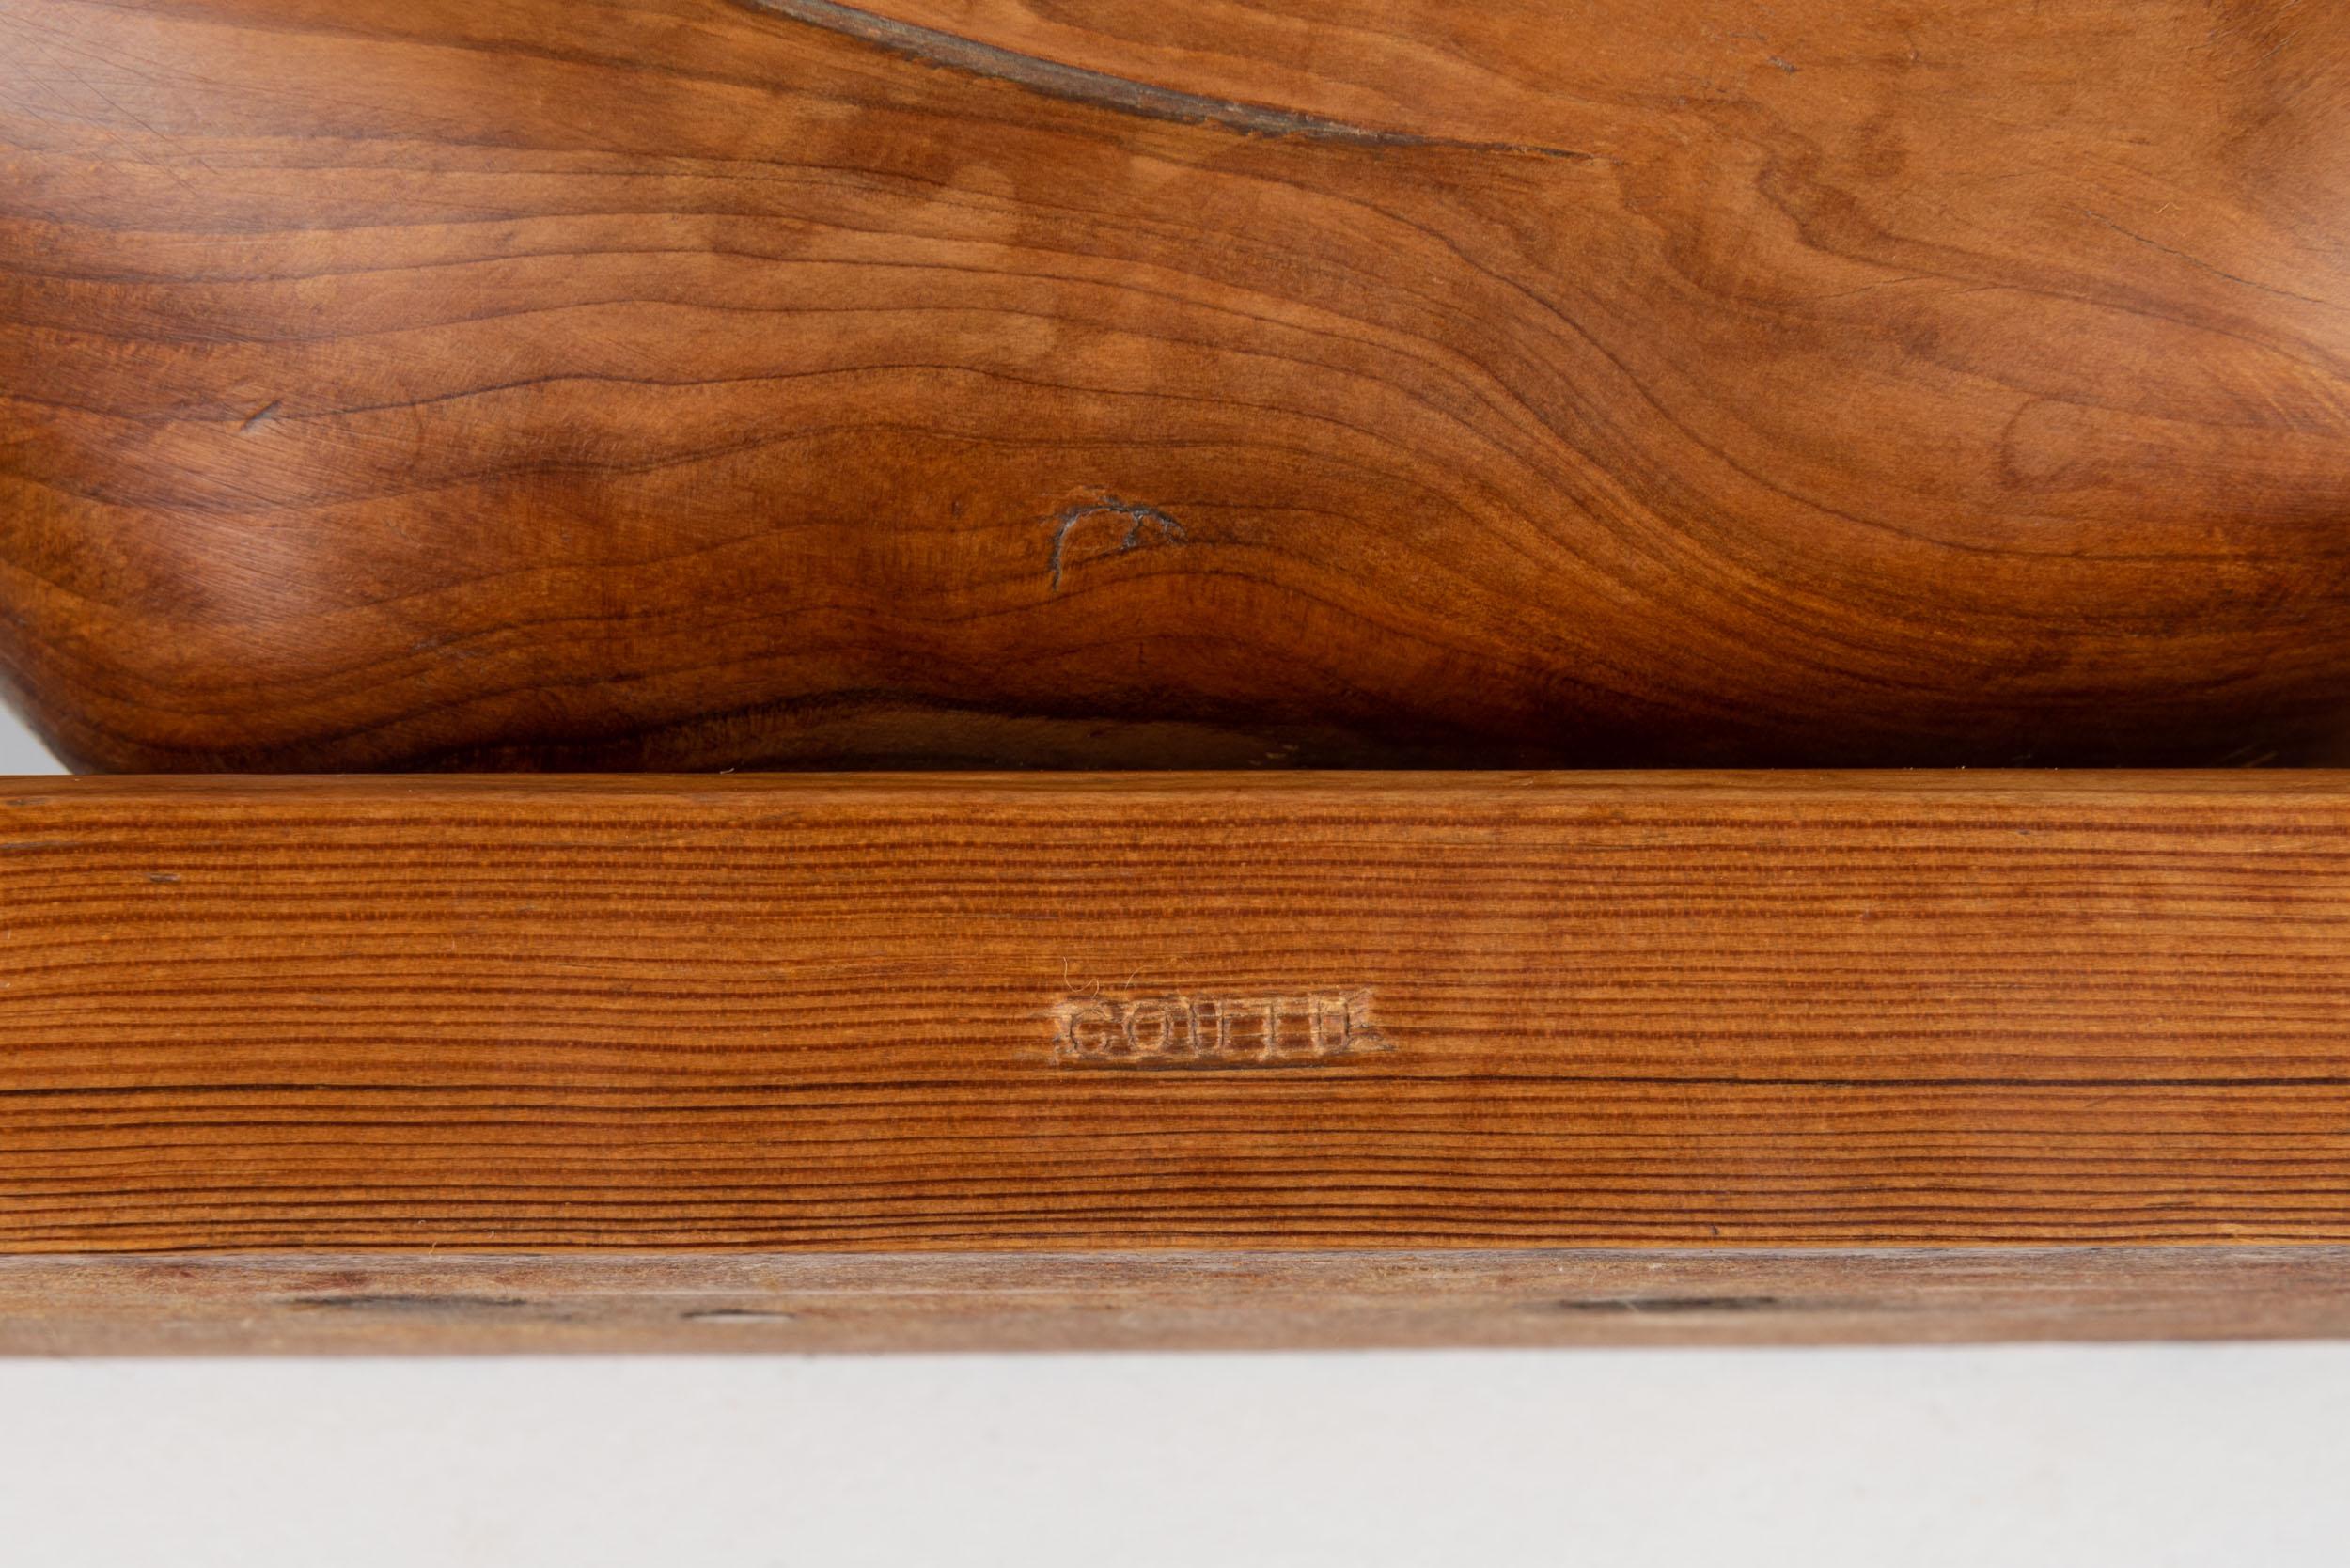 Fruitwood and brass
Circa 1950
Stamped to base: Coutu

PROVENANCE
A private collection